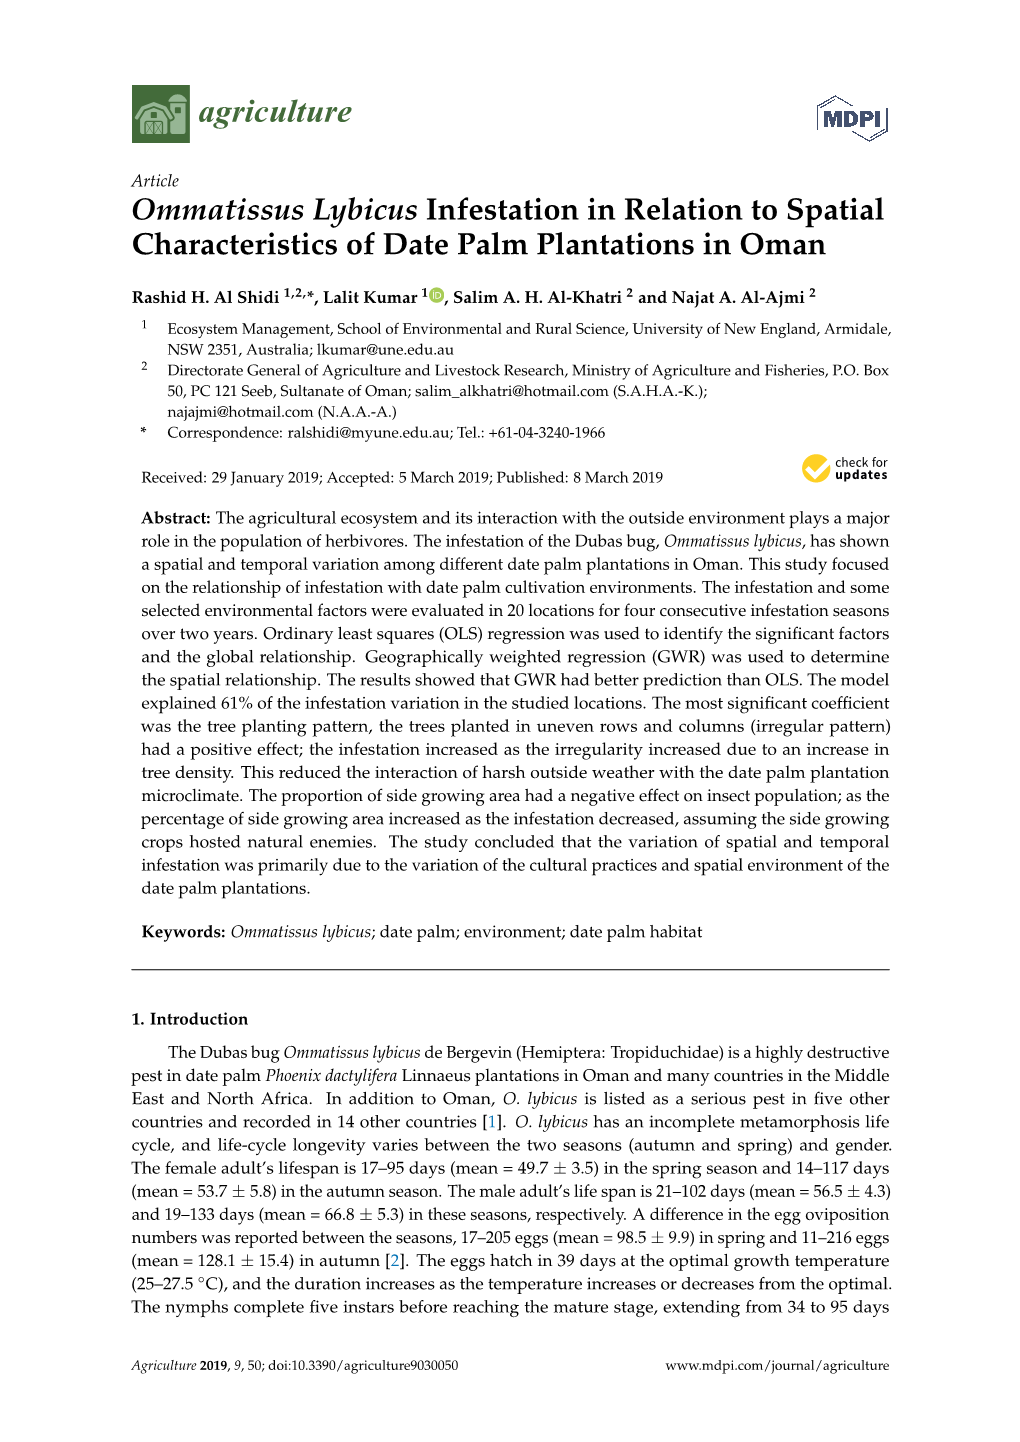 Ommatissus Lybicus Infestation in Relation to Spatial Characteristics of Date Palm Plantations in Oman